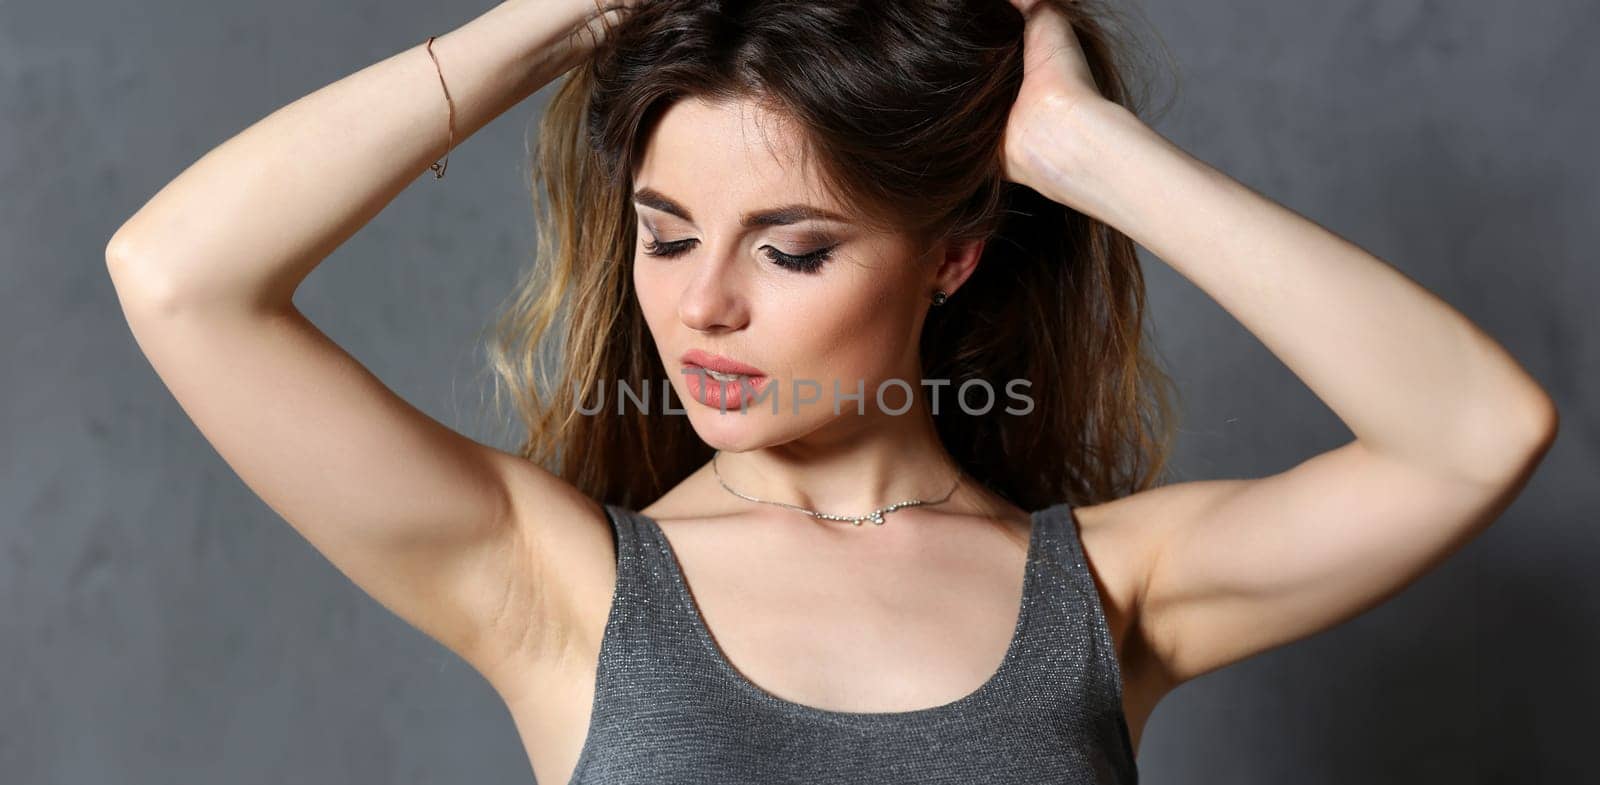 Beautiful european woman portrait. Worth a gray background and smiling beauty fashion style curly hair with white strands view of the eye in the camera